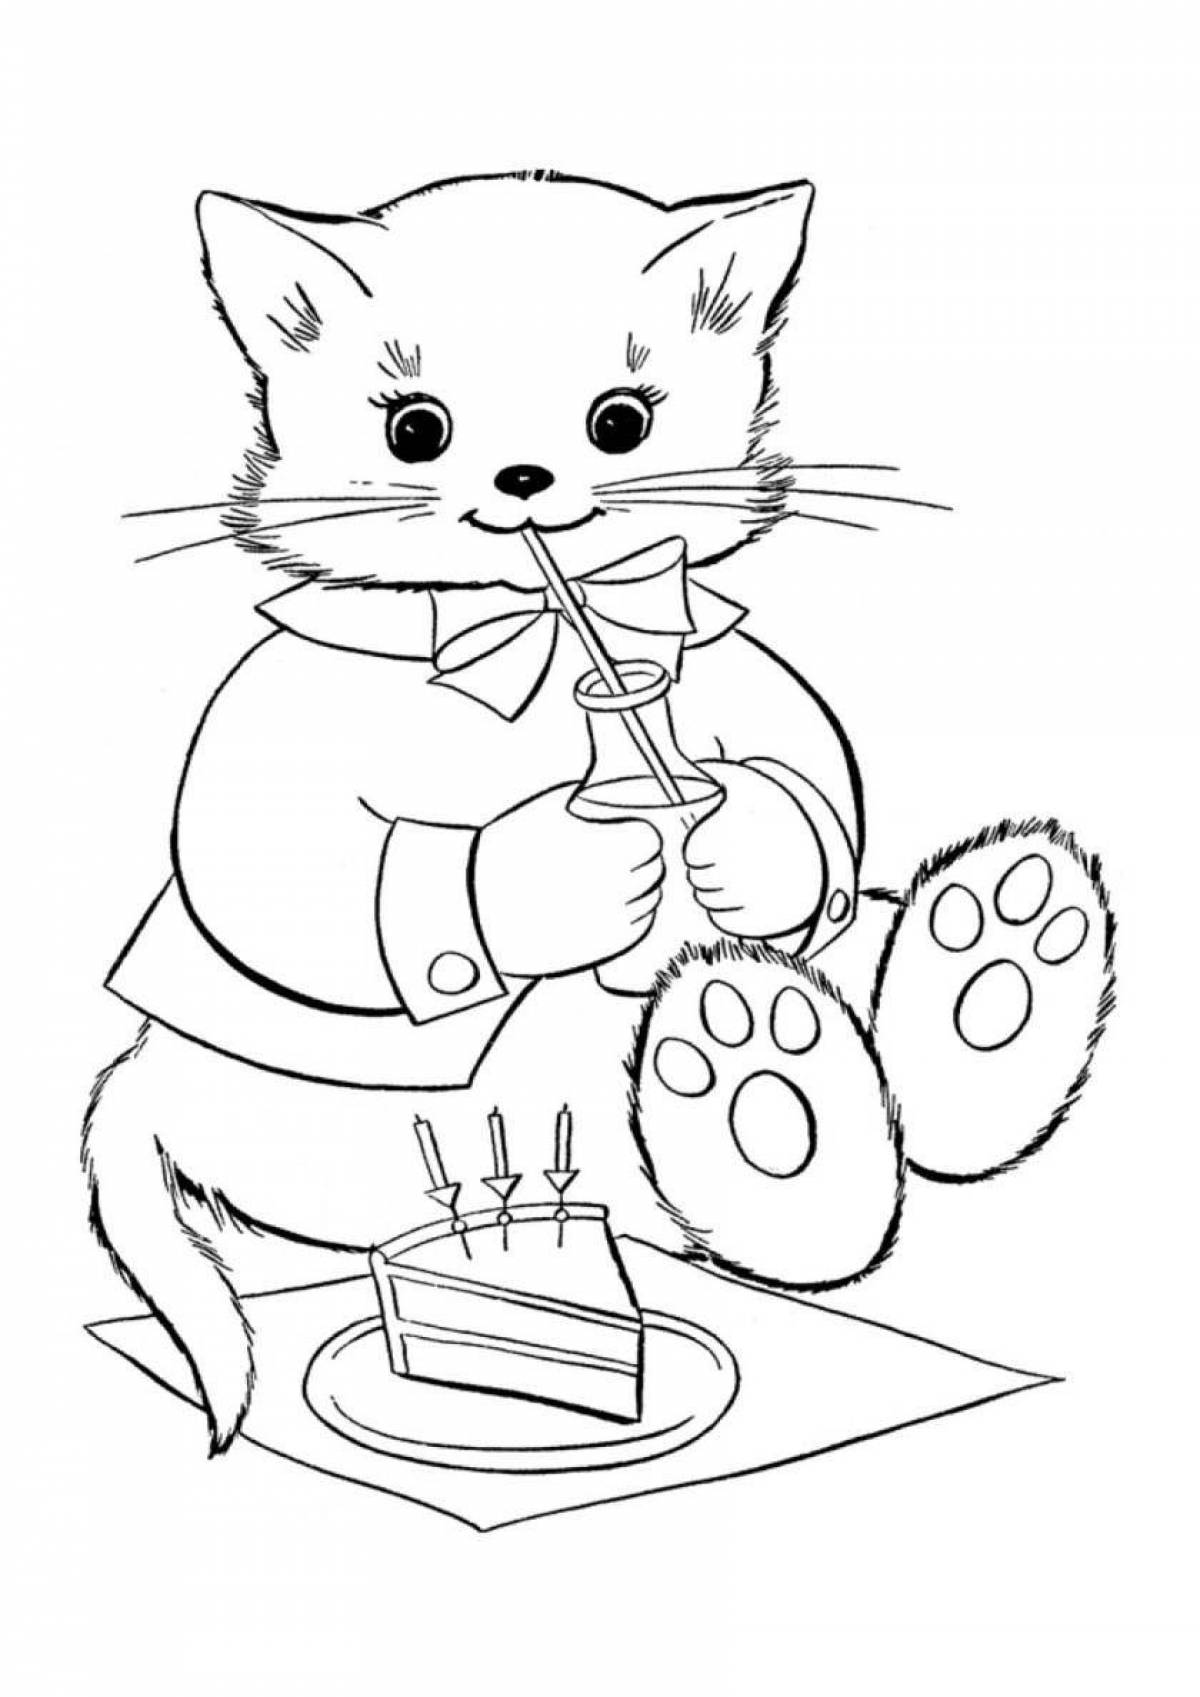 Coloring page playful cat drinking milk